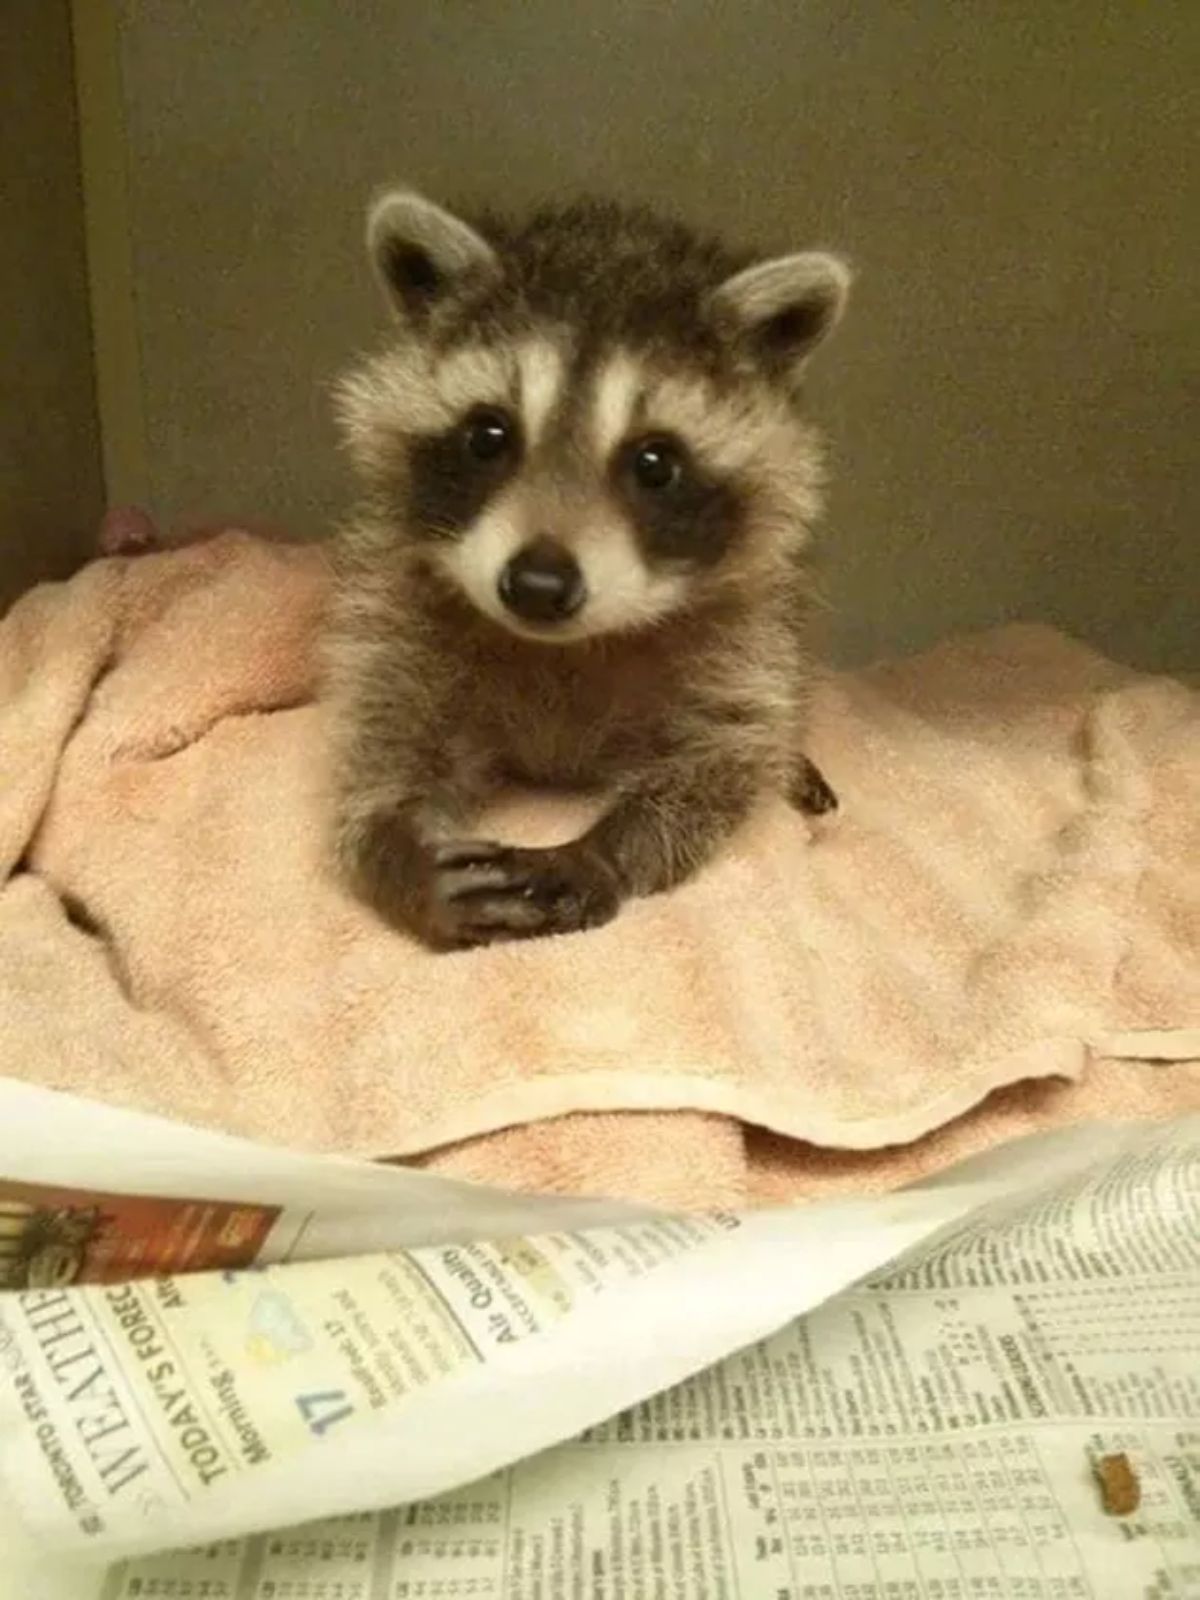 black and white baby raccoon on a pink towel